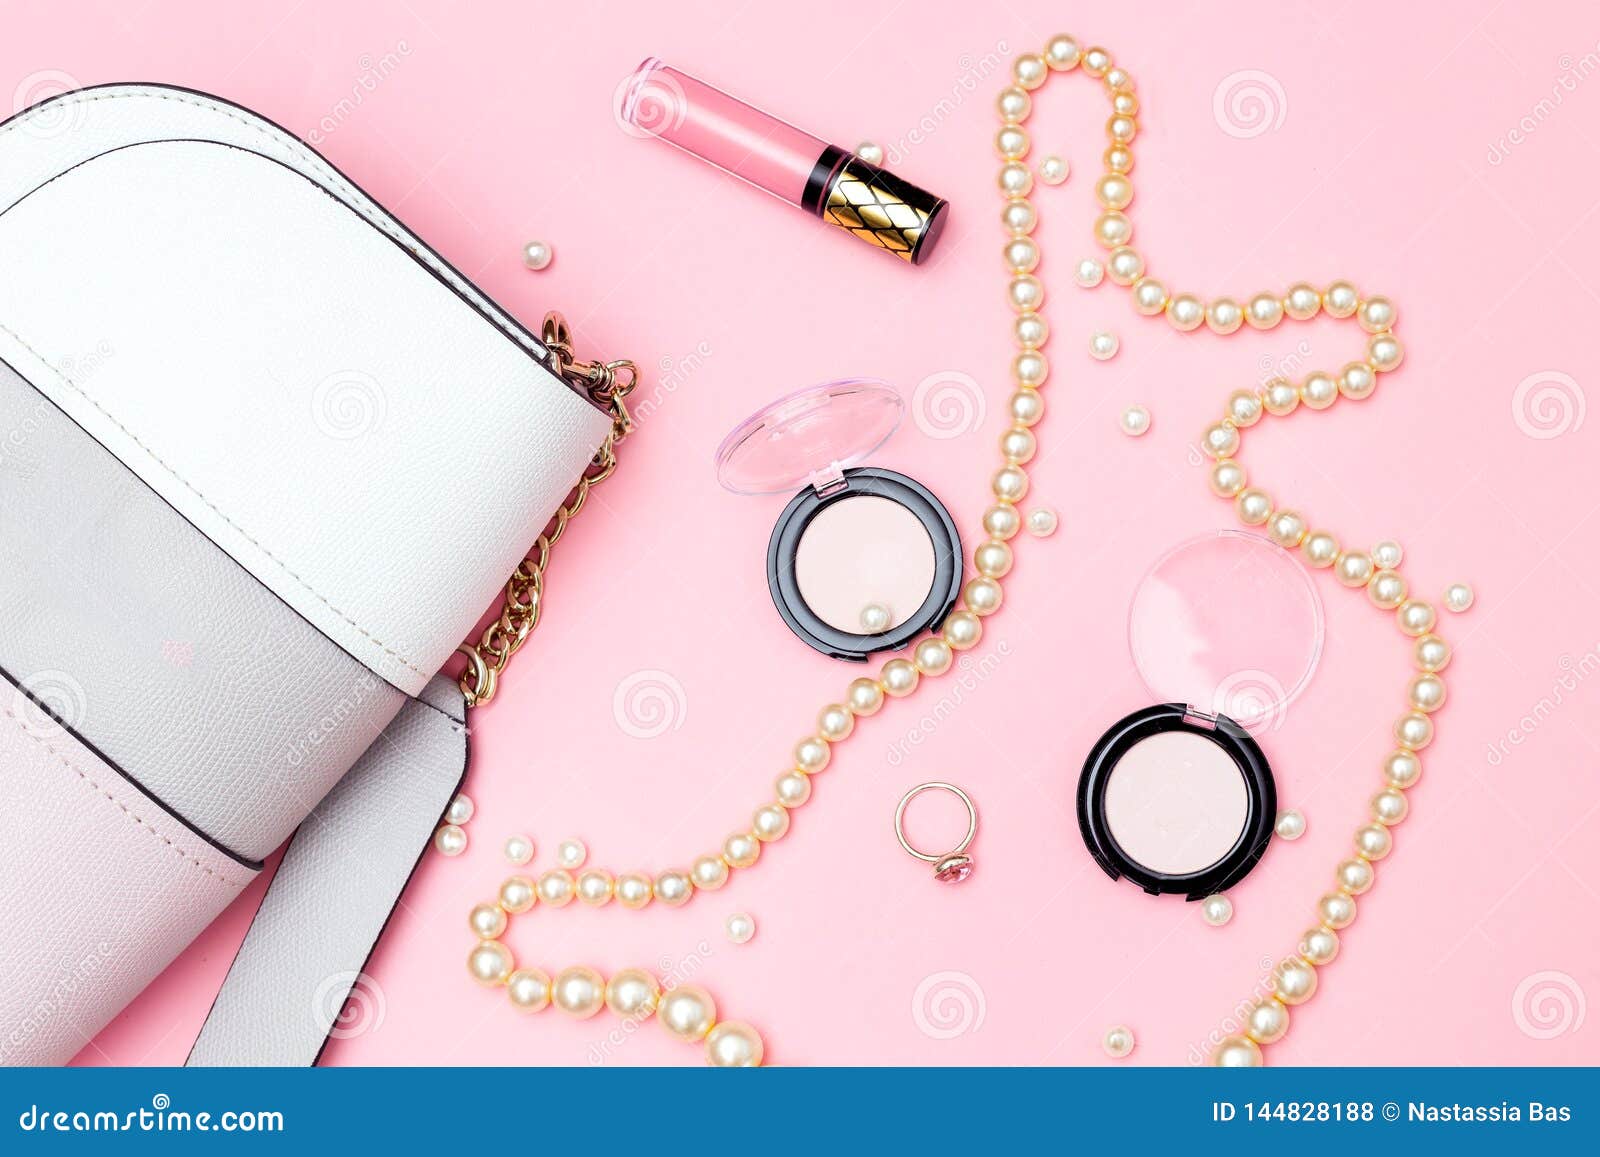 Jewelry and Beauty Make Up on Pink Background. Flat Lay Stock Photo ...